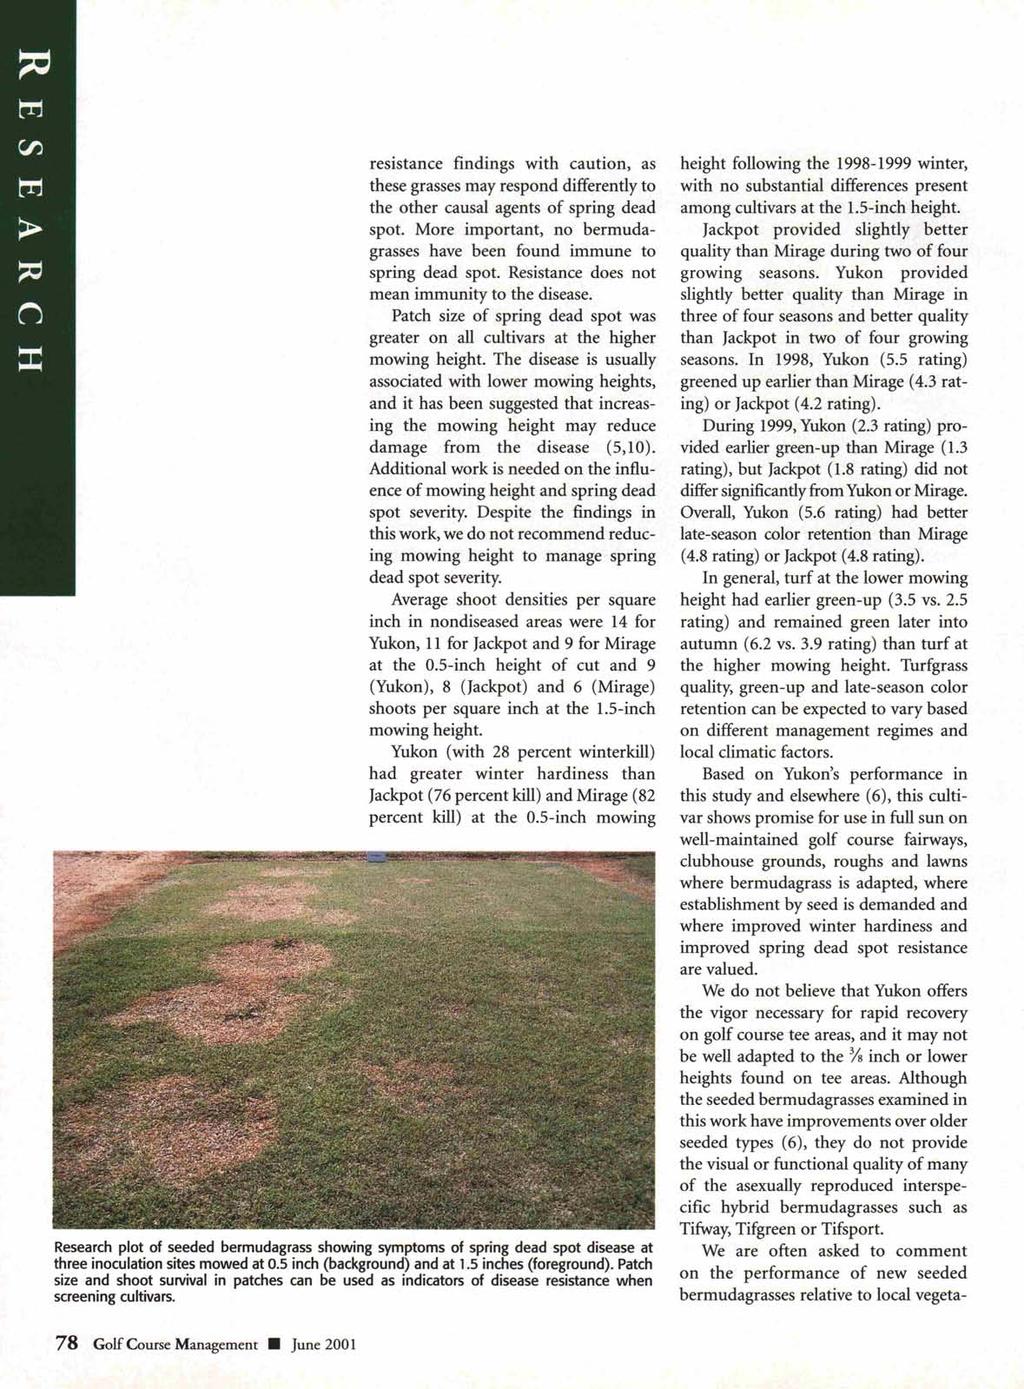 resistance findings with caution, as these grasses may respond differently to the other causal agents of spring dead spot. More important, no bermudagrasses have been found immune to spring dead spot.